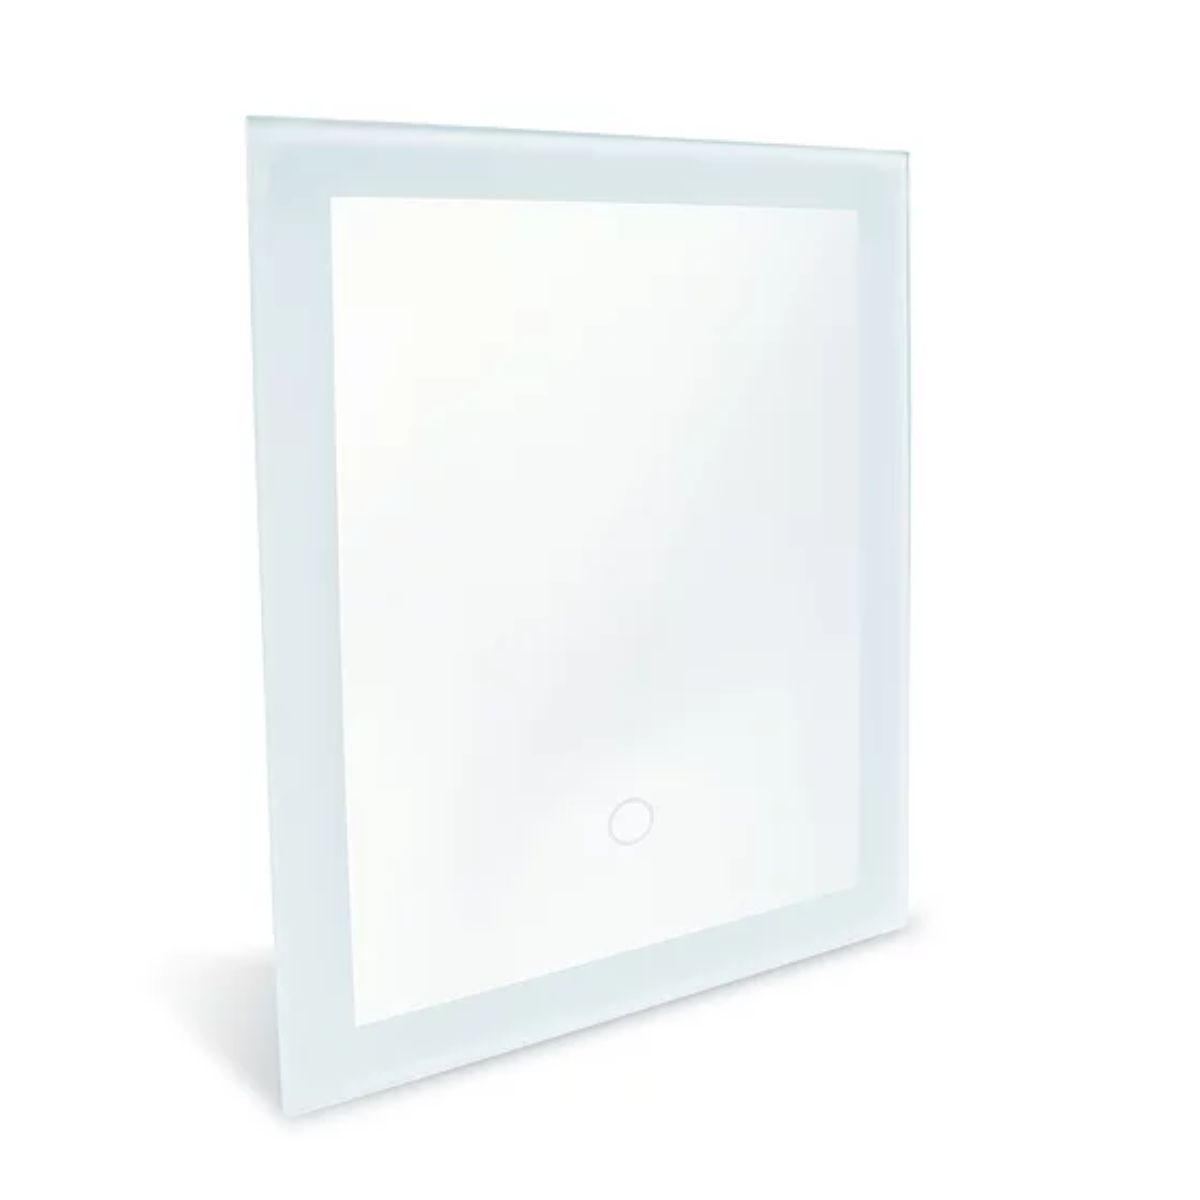 Royal 12 in. x 16 in. LED Wall/Table Stand Mirror with Touch On/Off Dimmer Function